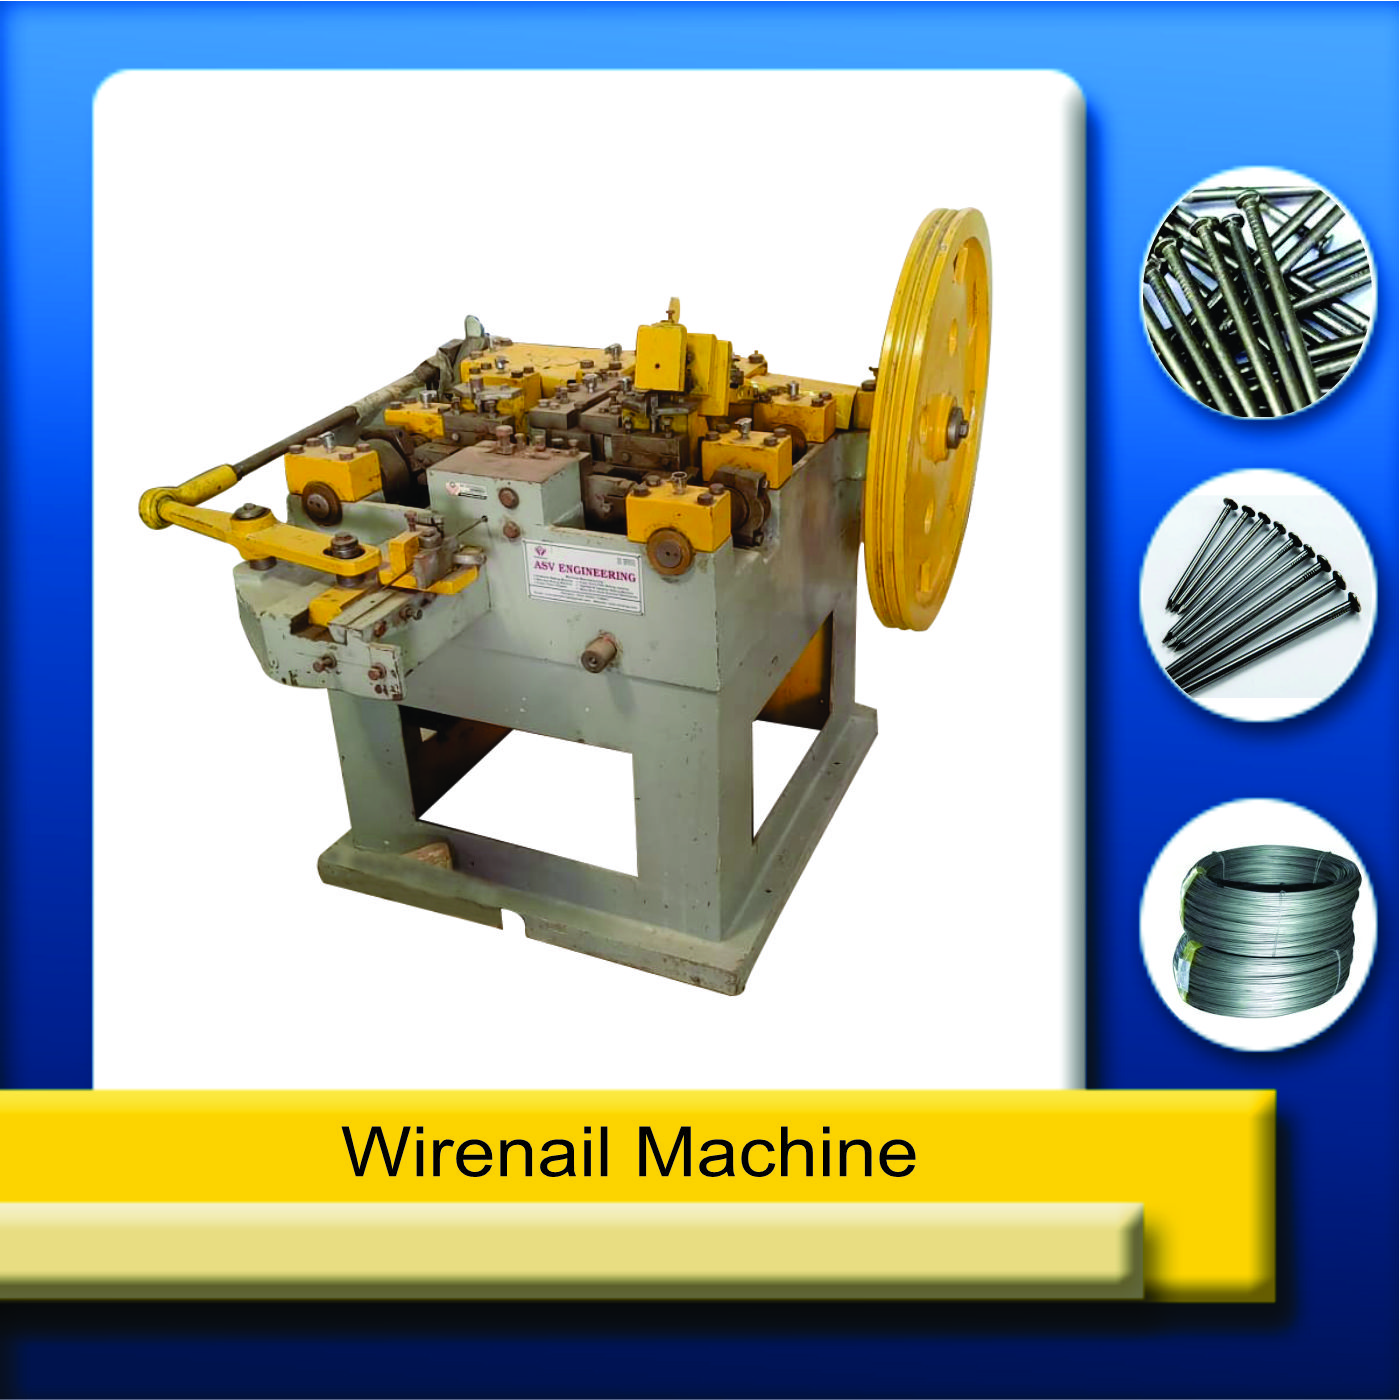 Wire Nail Making Machine N2 in Delhi at best price by Om Sai Ram  Enterprises (Branch Office) - Justdial